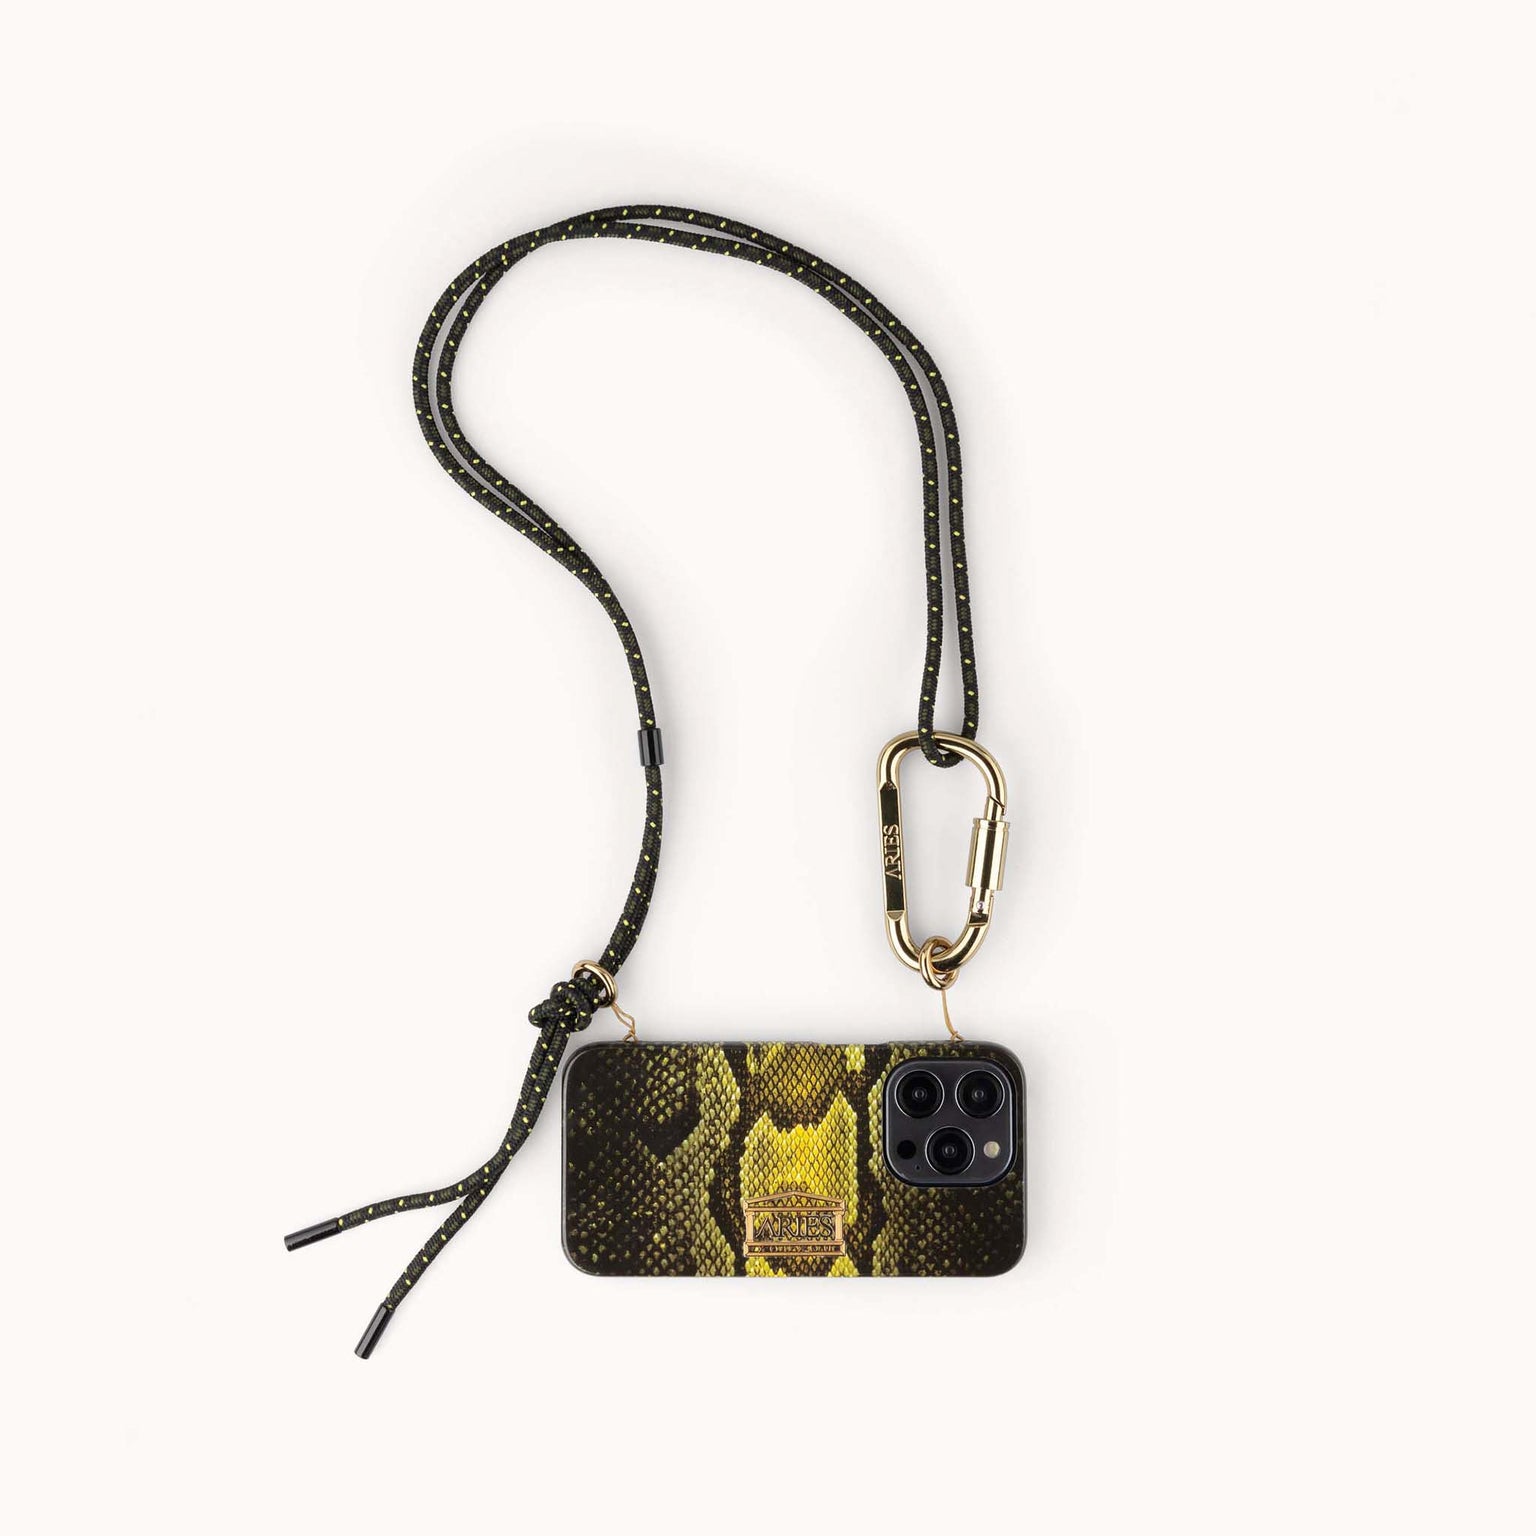 Aries x XOUXOU collab Phone Necklace with Rope and Case in Snake pattern Green